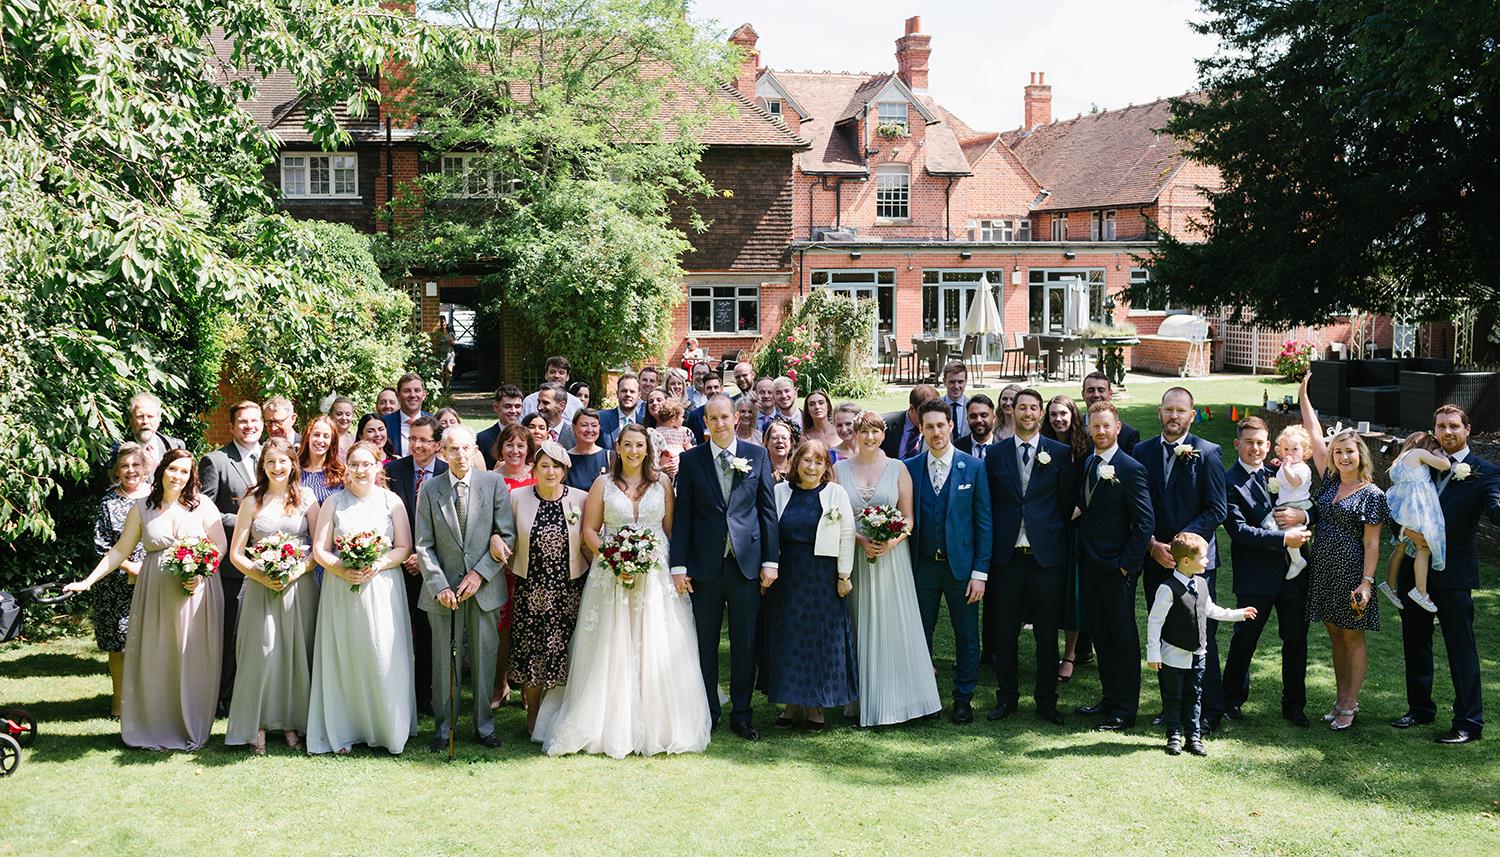 Group shot in the garden. Photo Credit: Ilaria Petrucci Photography